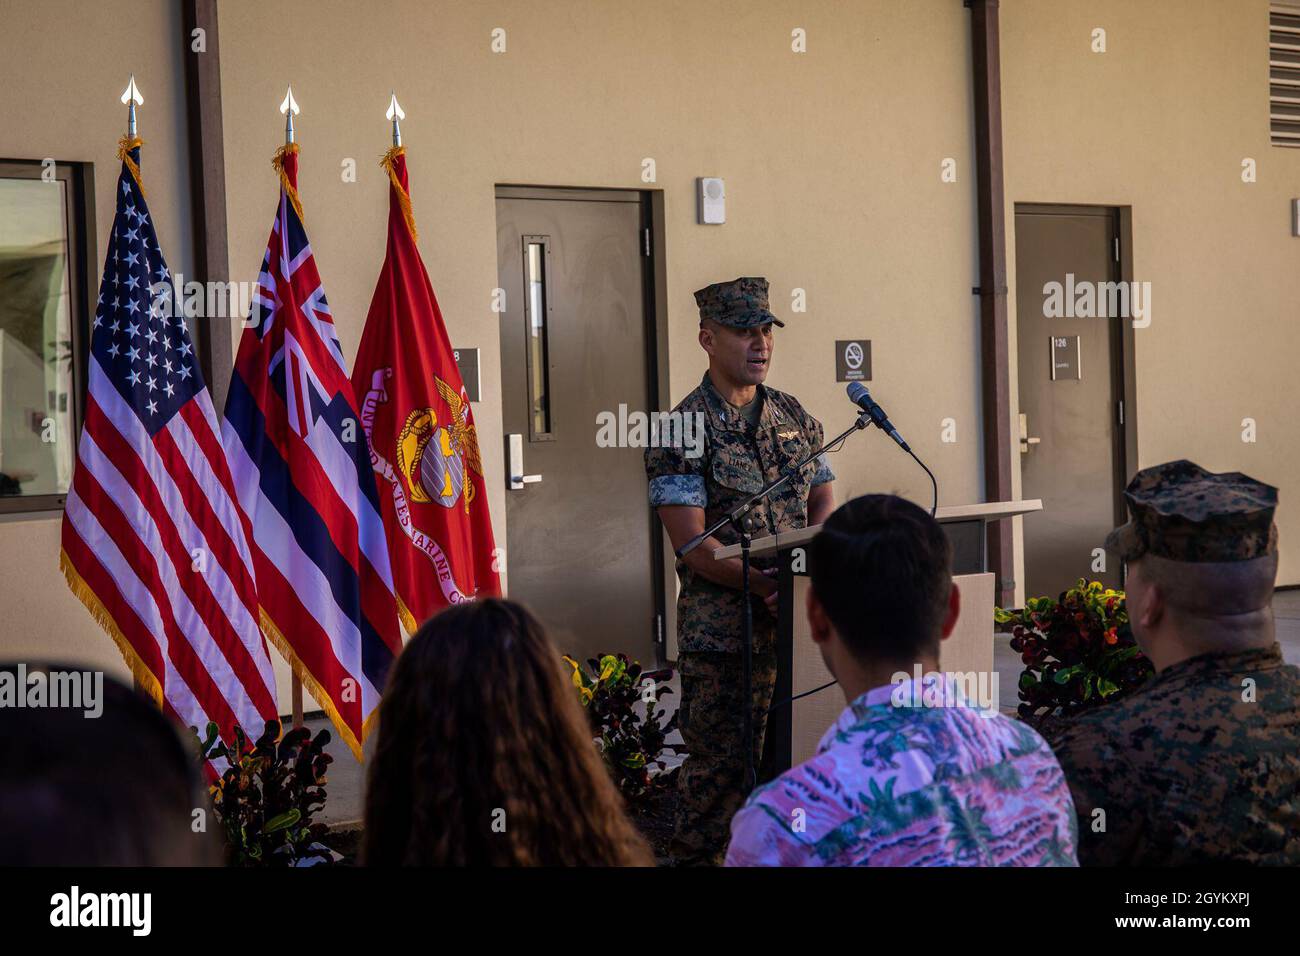 U.S. Marine Corps Col. Raul Lianez, commanding officer, Marine Corps Base Hawaii (MCBH), speaks to Service members and guests during the Bachelor Enlisted Quarters (BEQ), Bldg. 7251, Untying Maile Lei ceremony, MCBH, Jan. 24, 2020. The BEQ provides Marines with berthing that fully incorporates industry advancements since the Second World War, and looks toward meeting the 38th Commandant’s Planning Guidance and the Defense Policy Review Initiative. Guests in attendance included Col. Raul Lianez; Col. Stephen Lightfoot; Rep. Ed Case; Mr. Carlos Santa, Community Liaison (Sen. Hirono); Mr. Brandon Stock Photo